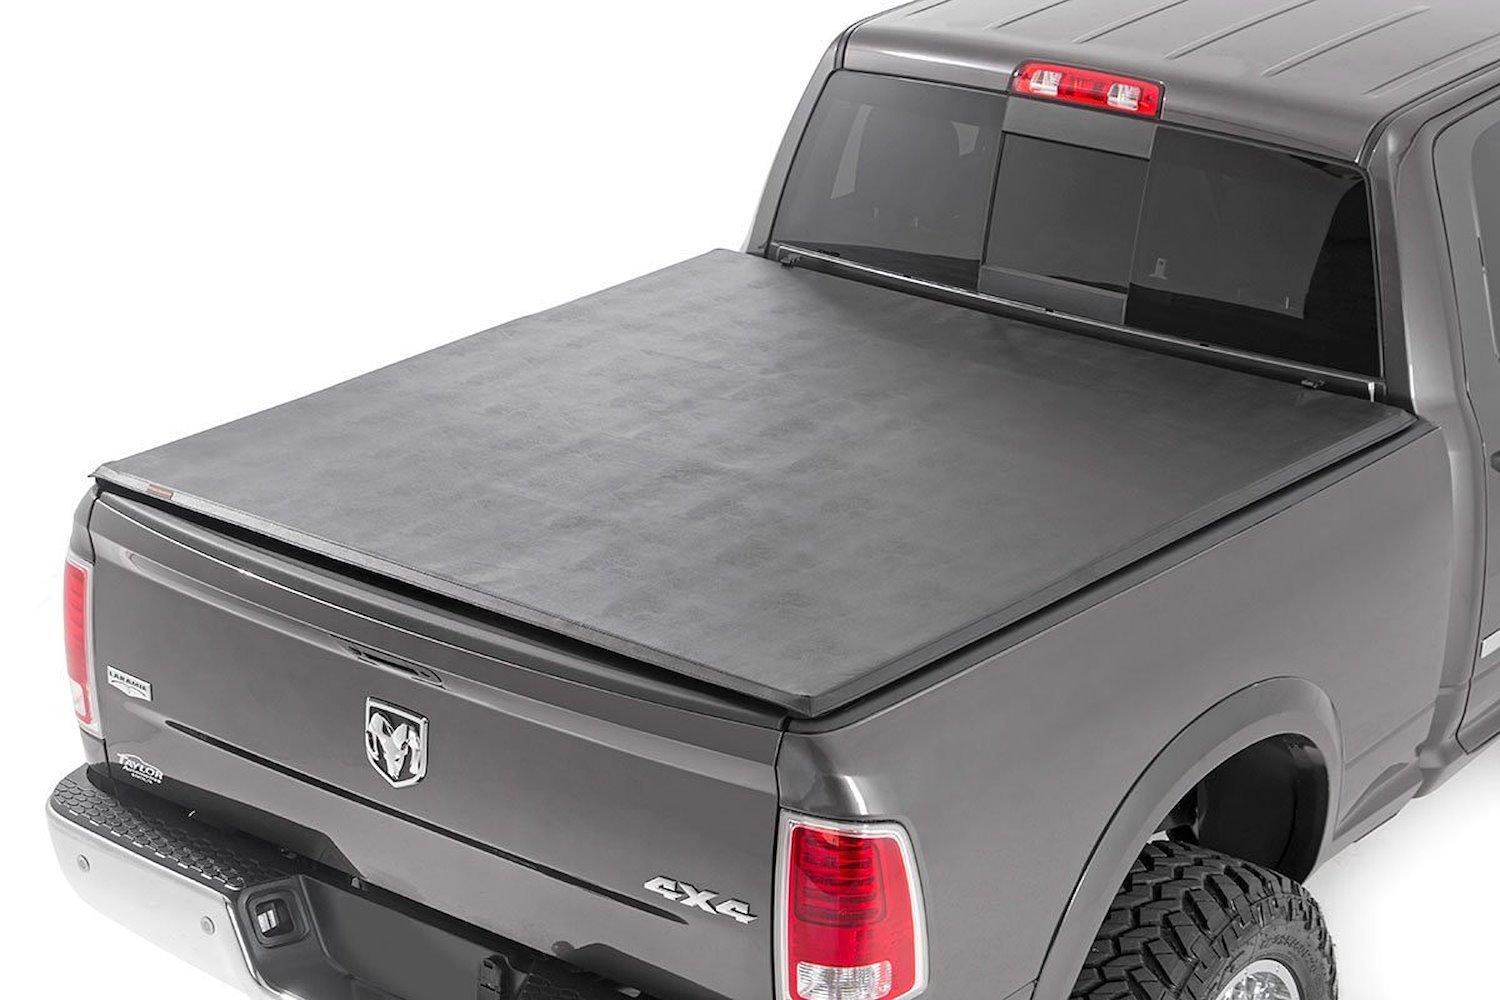 RC44309550 Dodge Soft Tri-Fold Bed Cover (09-18 Ram 1500 - 5' 5" Bed)